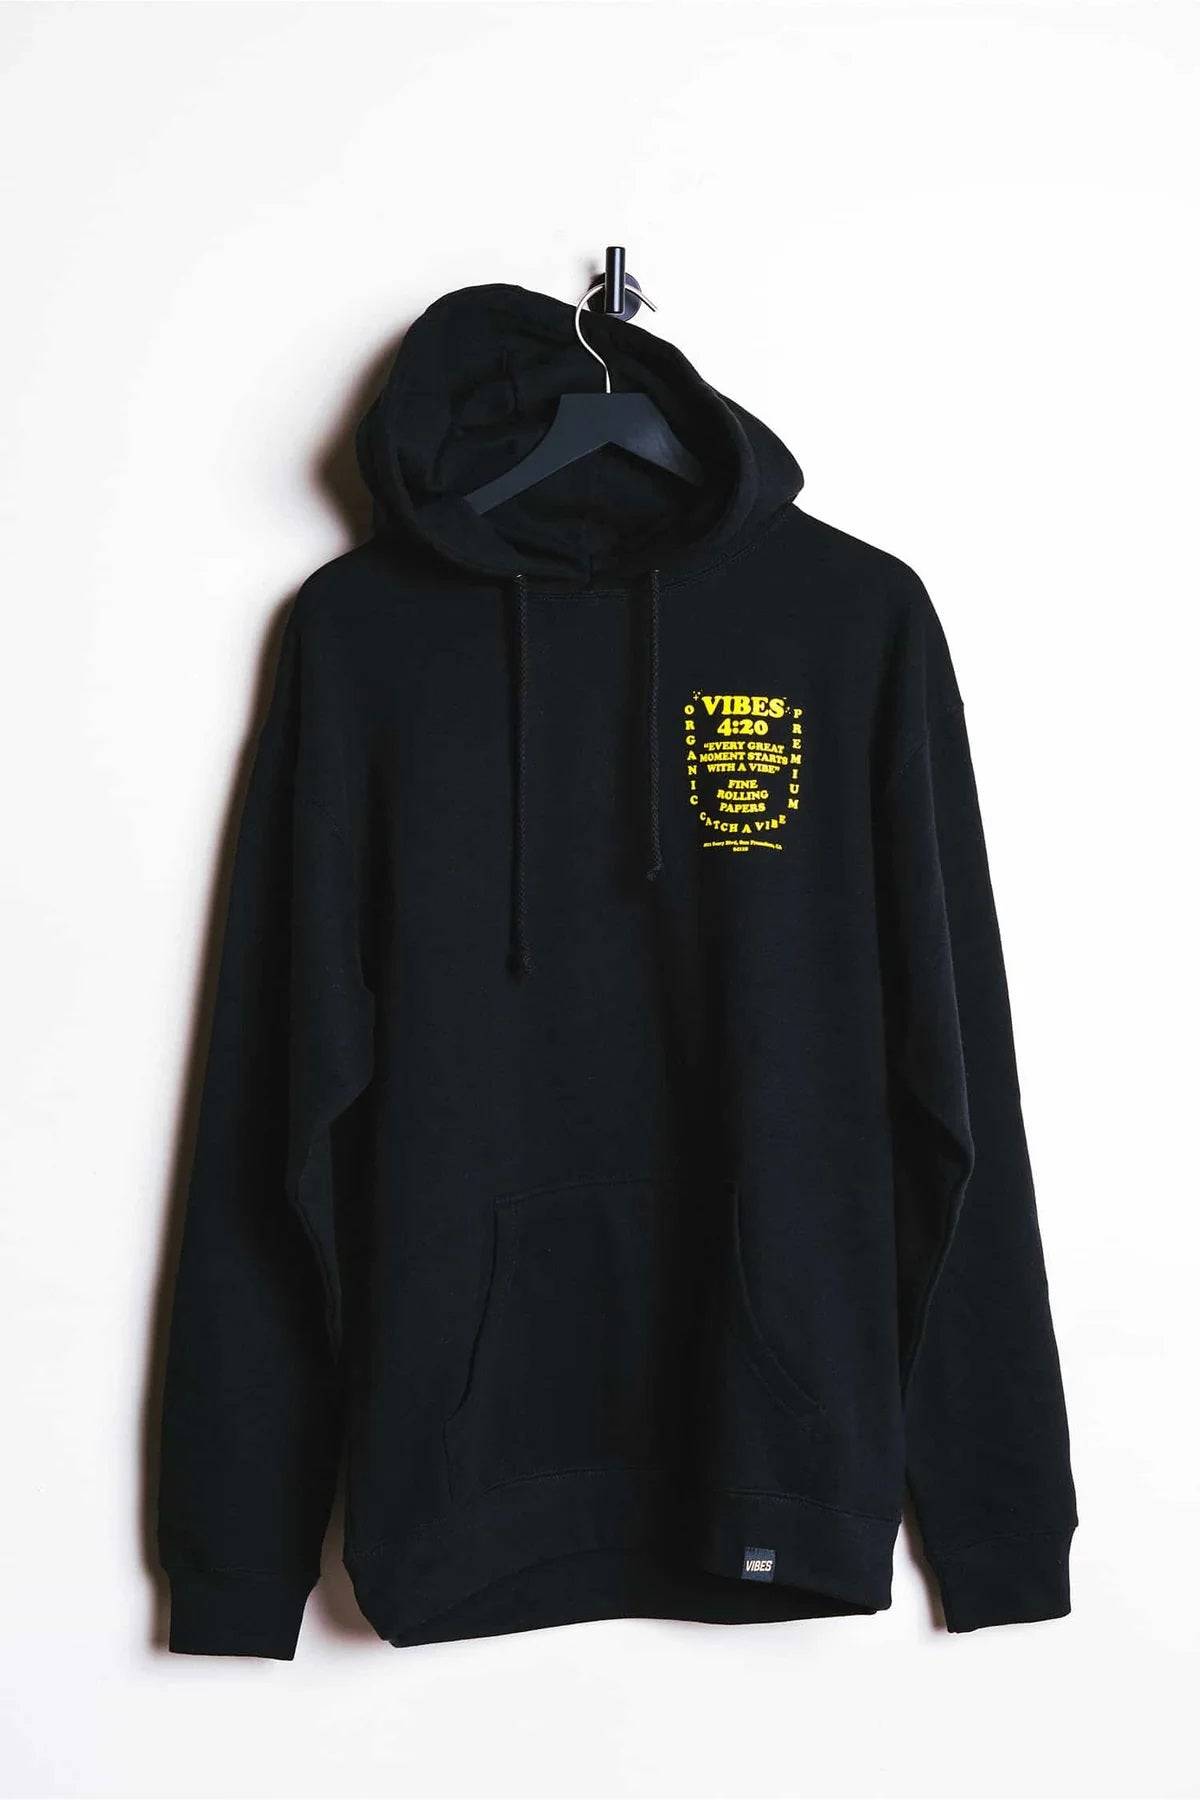 VIBES Black Starts With Vibe Hoodie 2X-Large